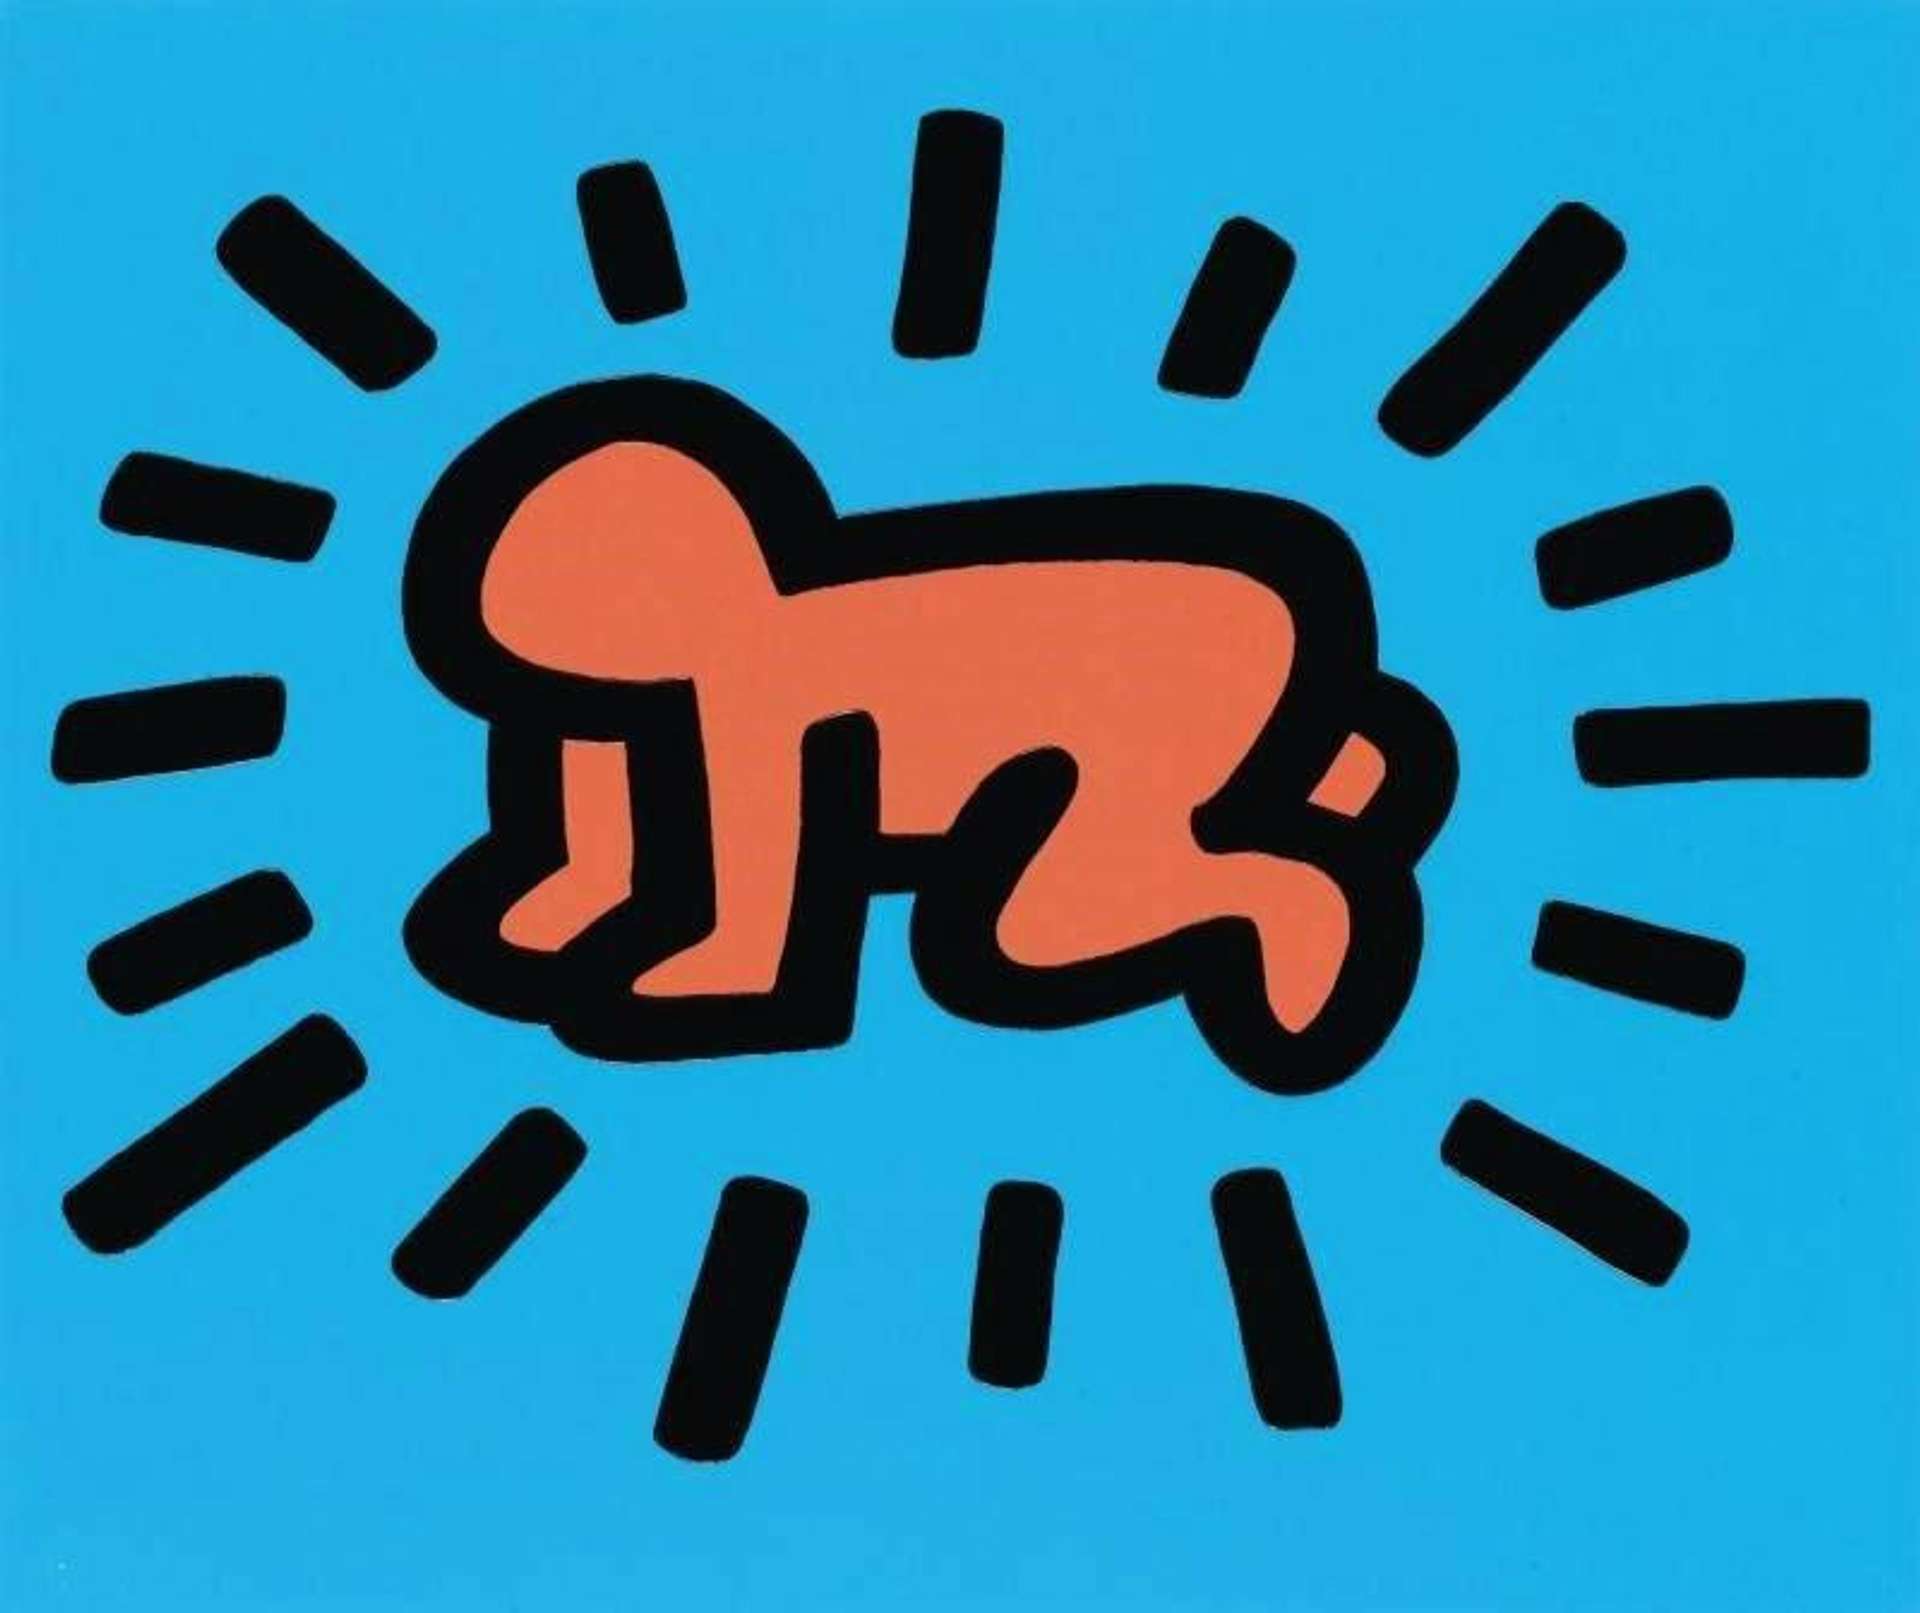 This print by Keith Haring shows a bright orange cartoon baby, crawling on its hands and knees, with a sky-blue backdrop. Rendered in his characteristic pop-graffiti style, the figure is boldly outlined in black with thick, radiating lines pulsating from its body.